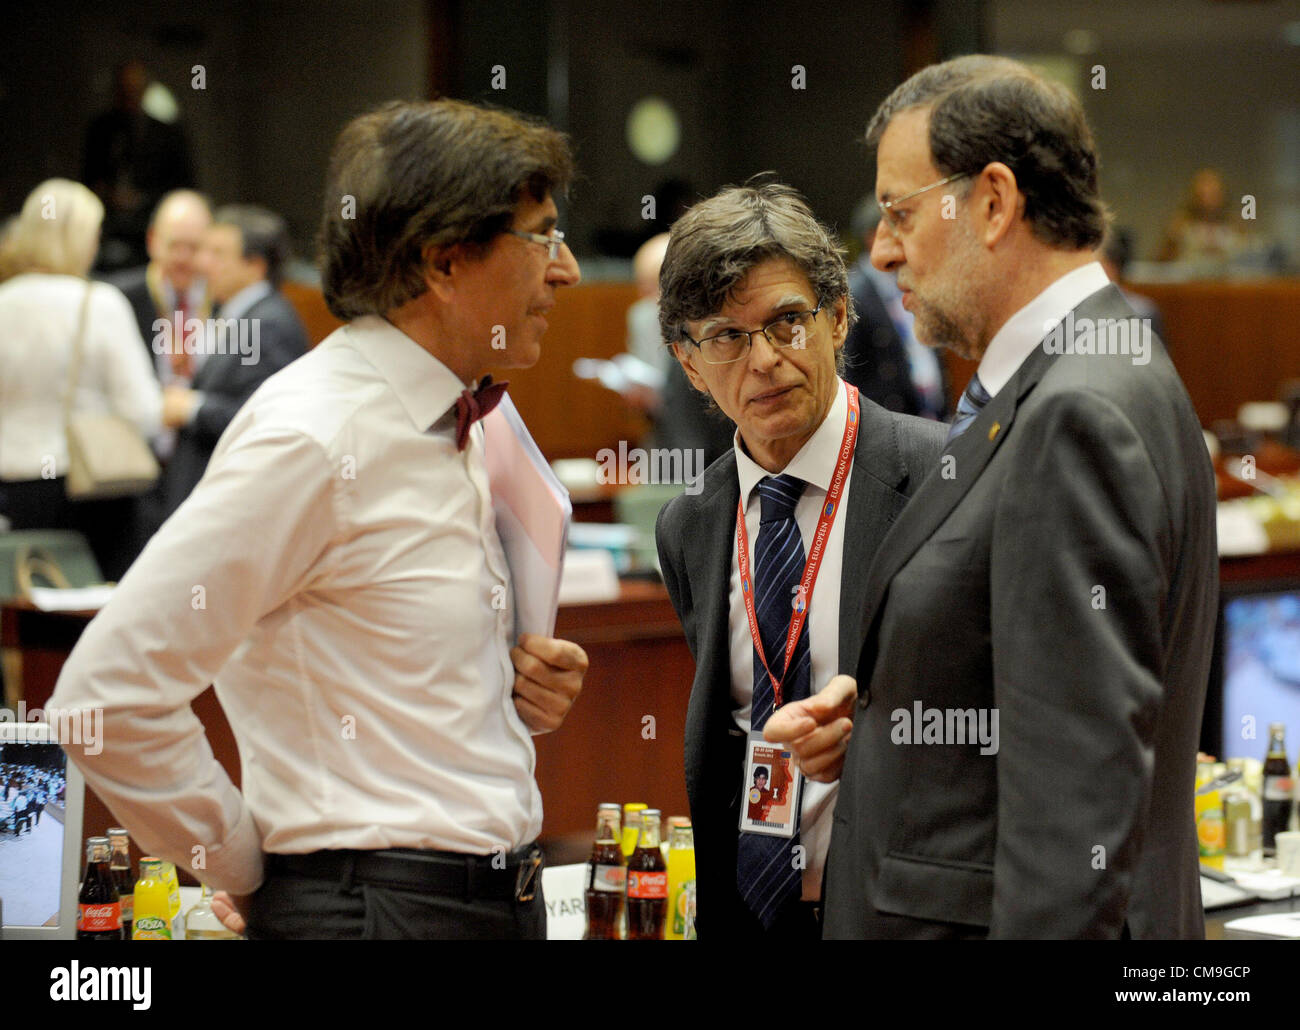 June 29, 2012 - Brussels, Belgium - Belgium's Prime Minister Elio di Rupo talks with Spanish Prime Minister Mariano RAJOY helped by a interpreter prior to the last meeting with leaders of the EU..European EU leaders agreed after overnight meetings in Brussels to use bailout fund to recapitalise struggling banks helping Spain, which sought a Ã›100 billion ($A124.66 billion) rescue to help its troubled banks and is facing rising borrowing costs..EU President Herman Van Rompuy called it a ''breakthrough that banks can be recapitalised directly''. EU President Herman Van Rompuy say leaders of the  Stock Photo